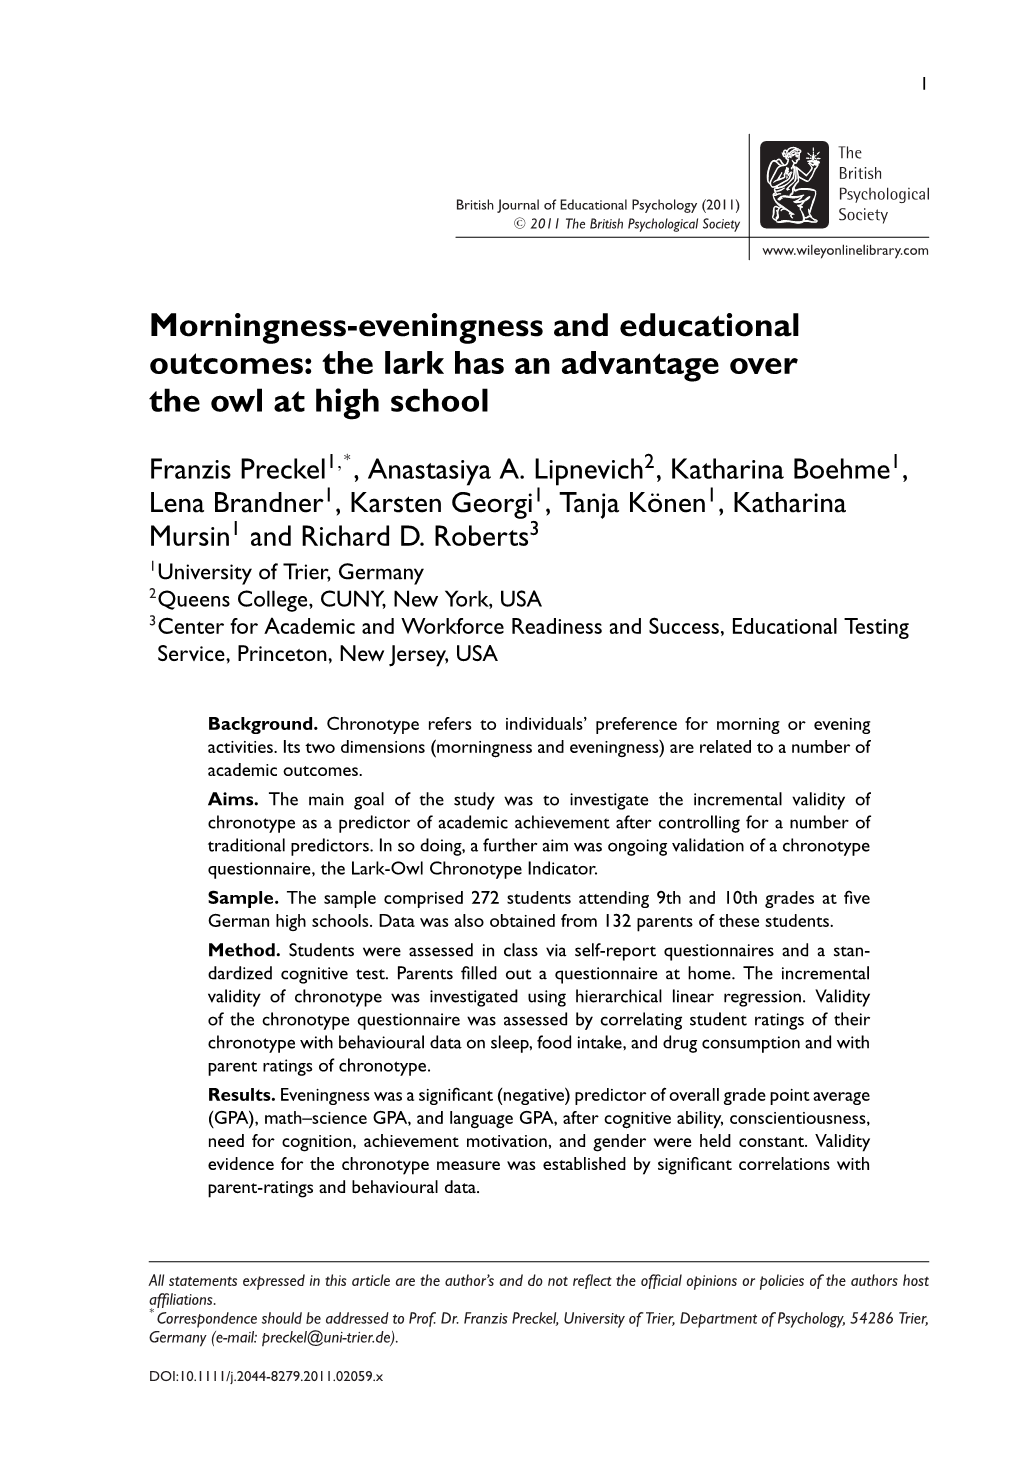 Morningnesseveningness and Educational Outcomes: the Lark Has